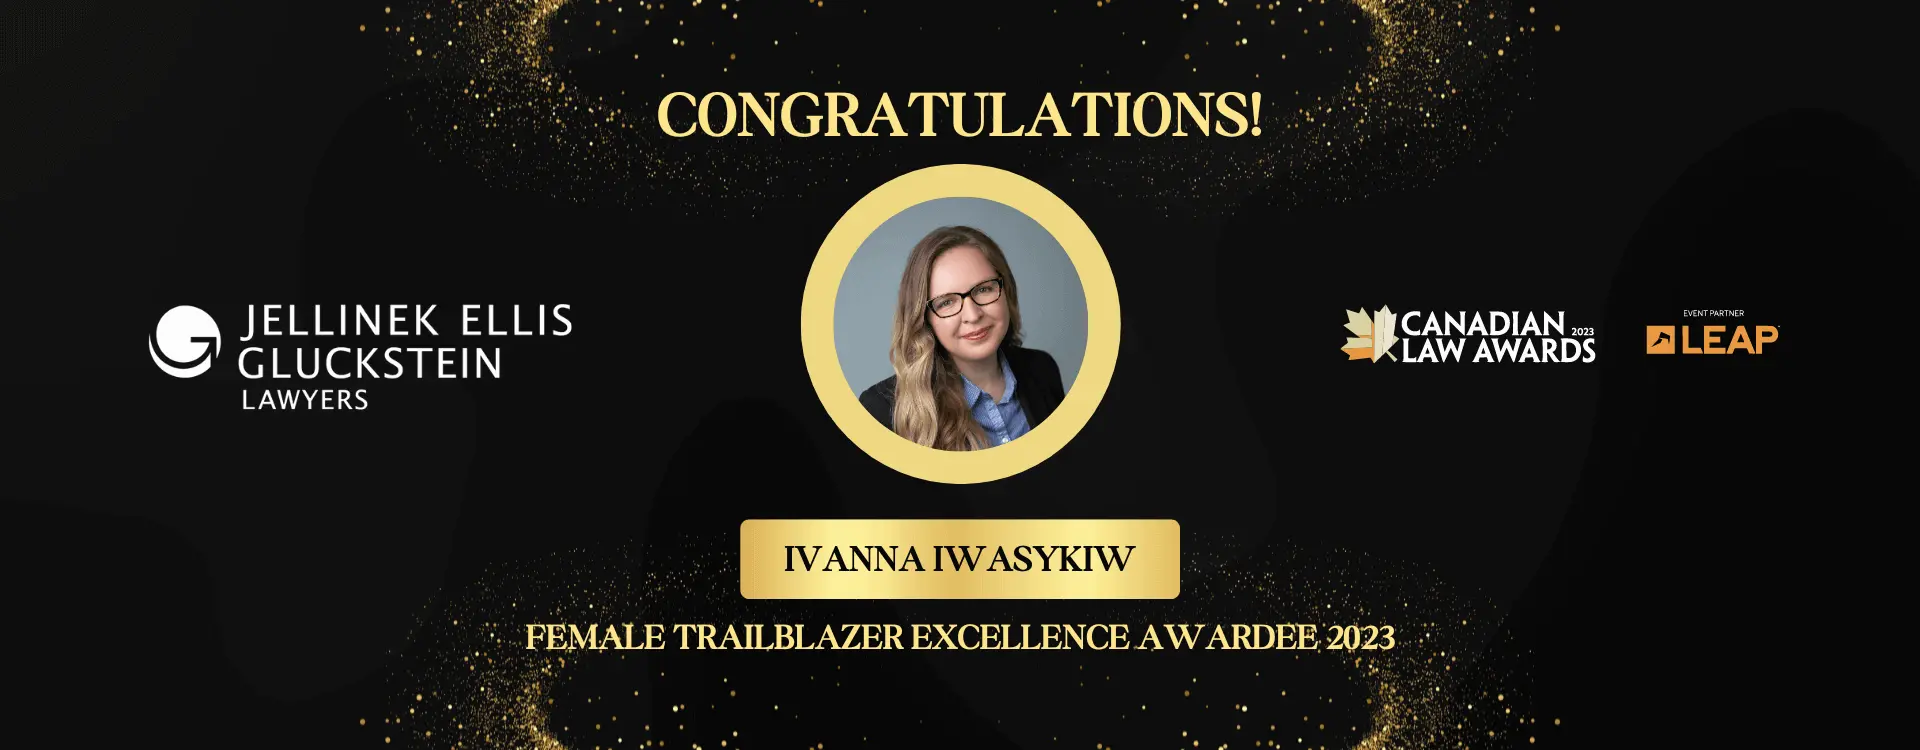 Ivanna Iwasykiw of Jellinek Ellis Gluckstein Lawyers has been selected as an Excellence Awardee in the annual Canadian Law Awards in the category of Female Trailblazer of the Year (Private Practice).